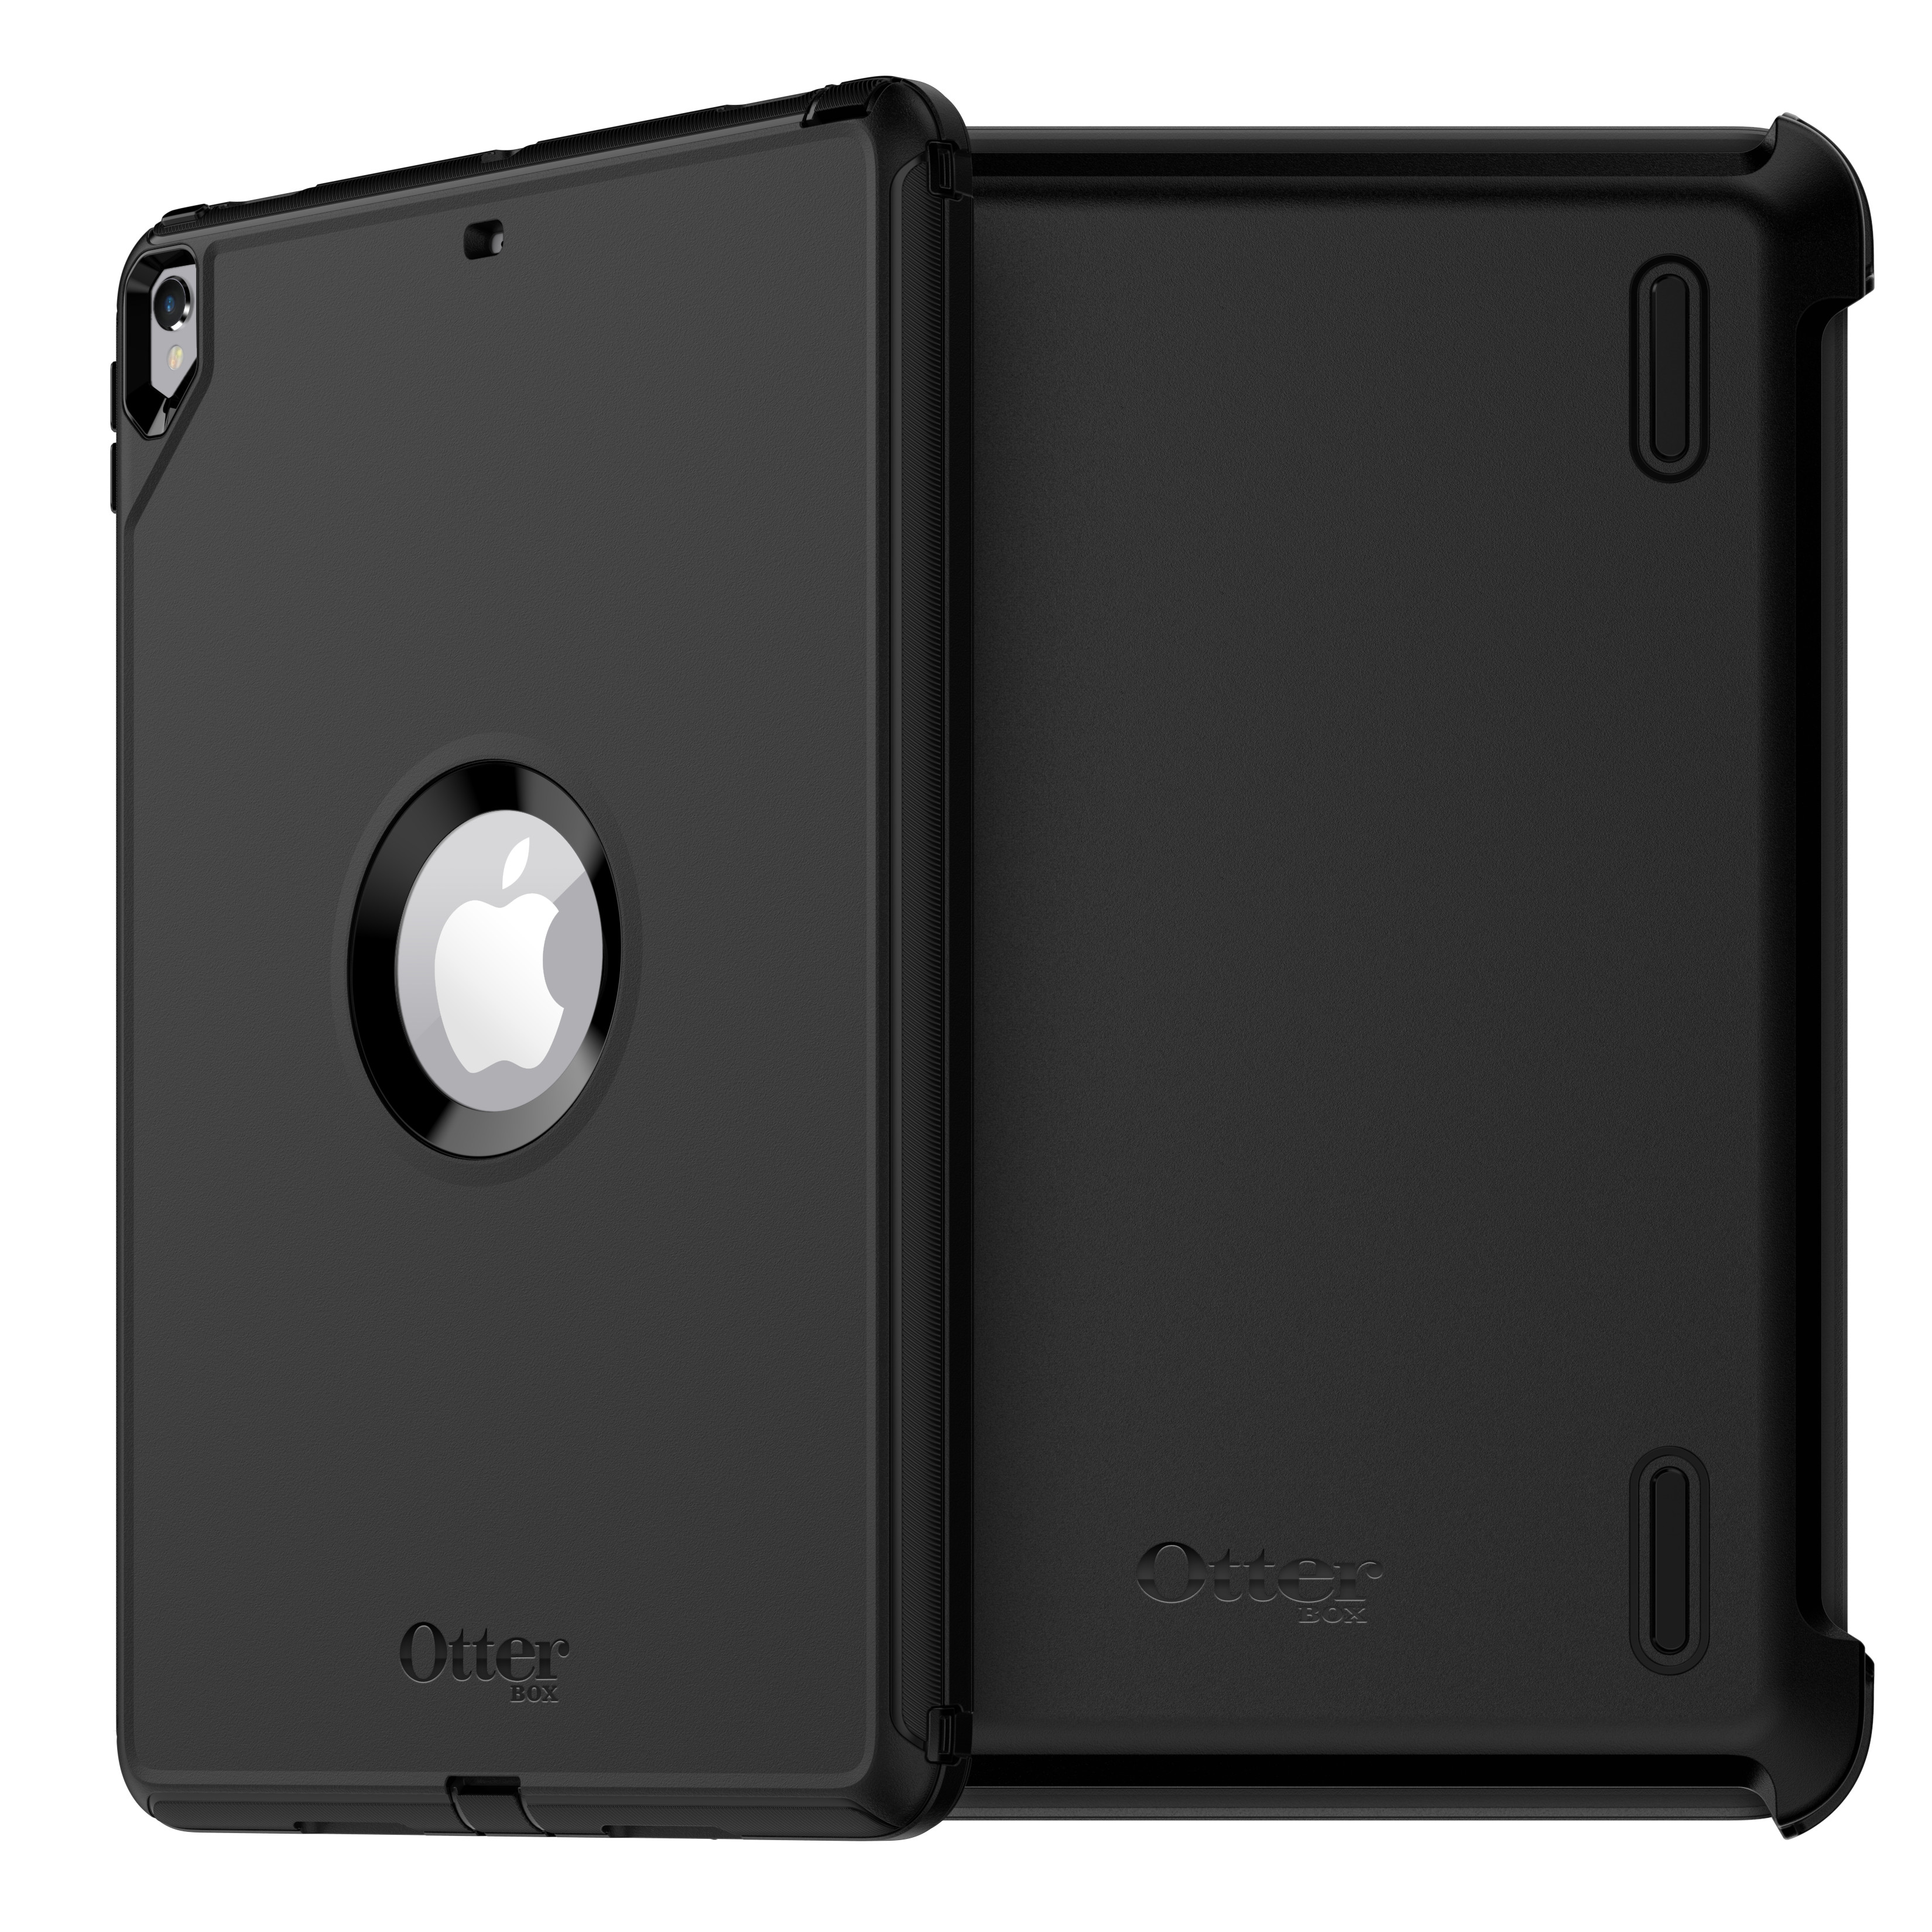 Otterbox - Defender Tablet Case for iPad Pro 10.5/Air (3rd gen), Black - image 1 of 10